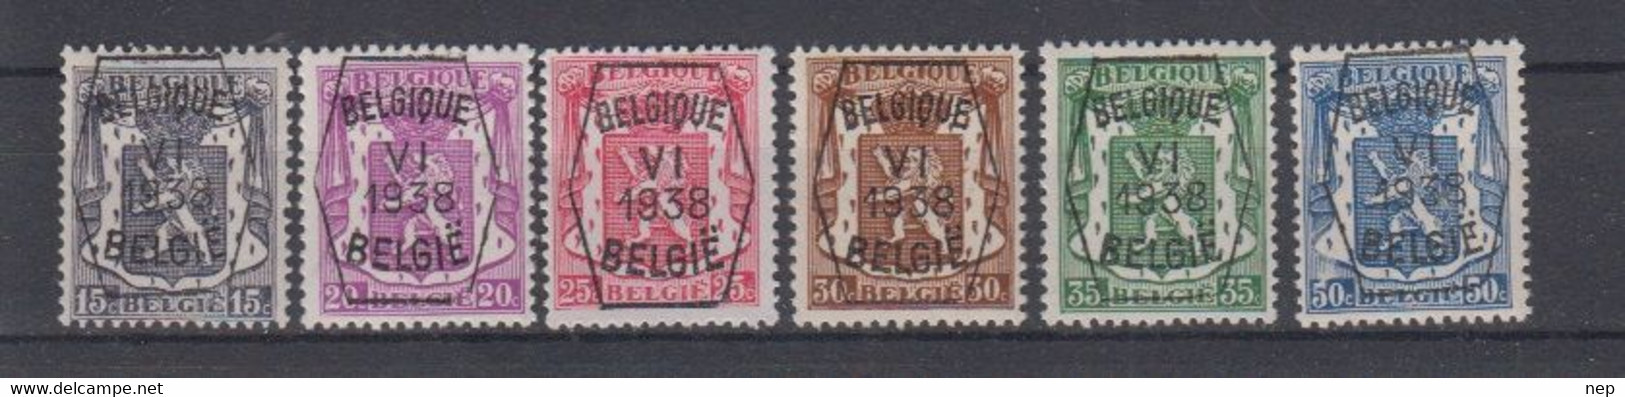 BELGIË - OBP - 1938 - PRE 363/68 (6 Type A) - MNH** - Typo Precancels 1936-51 (Small Seal Of The State)